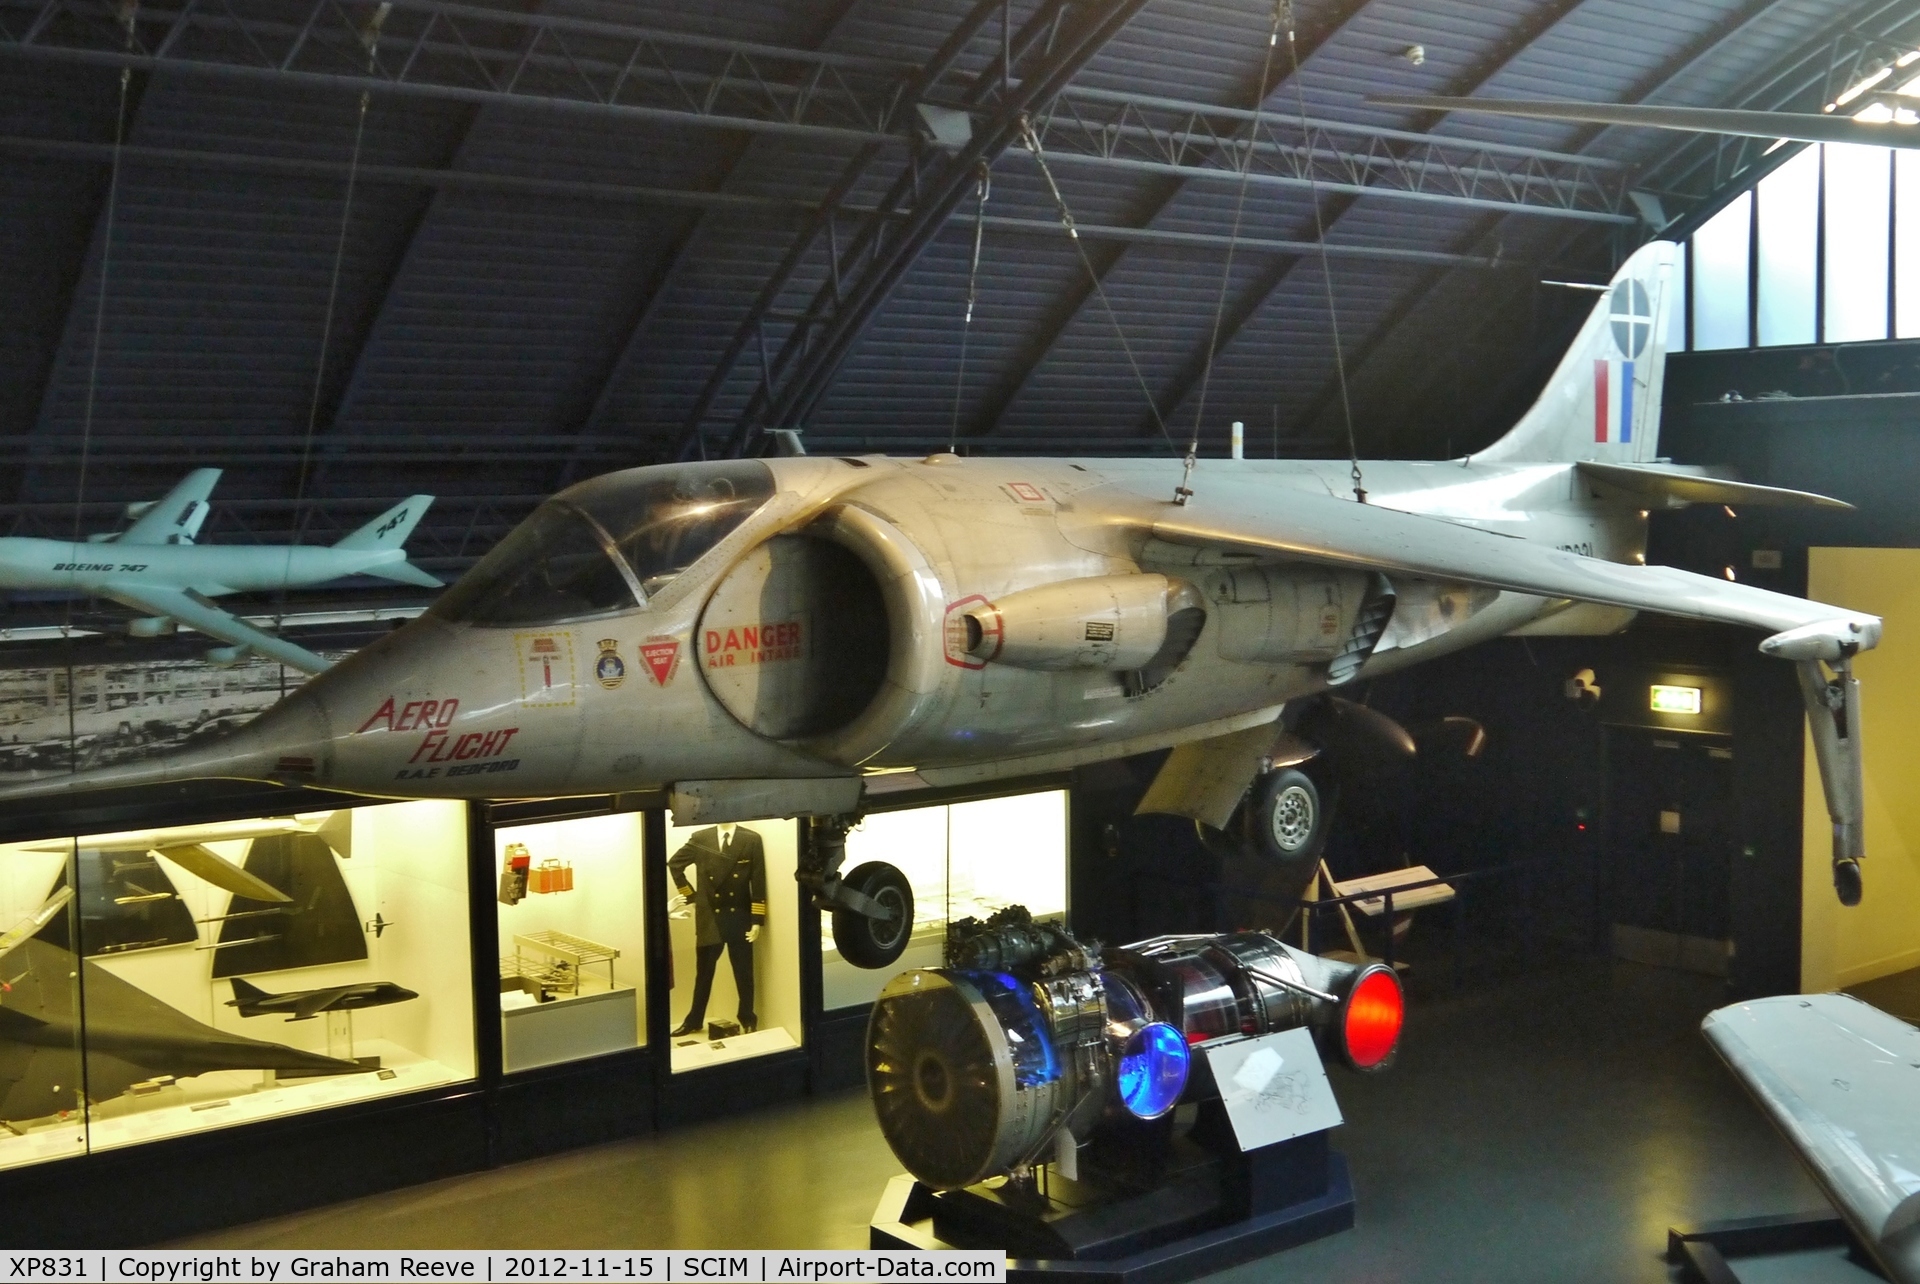 XP831, 1961 Hawker Siddeley P.1127 C/N P-01, On display at the Science Museum, London.